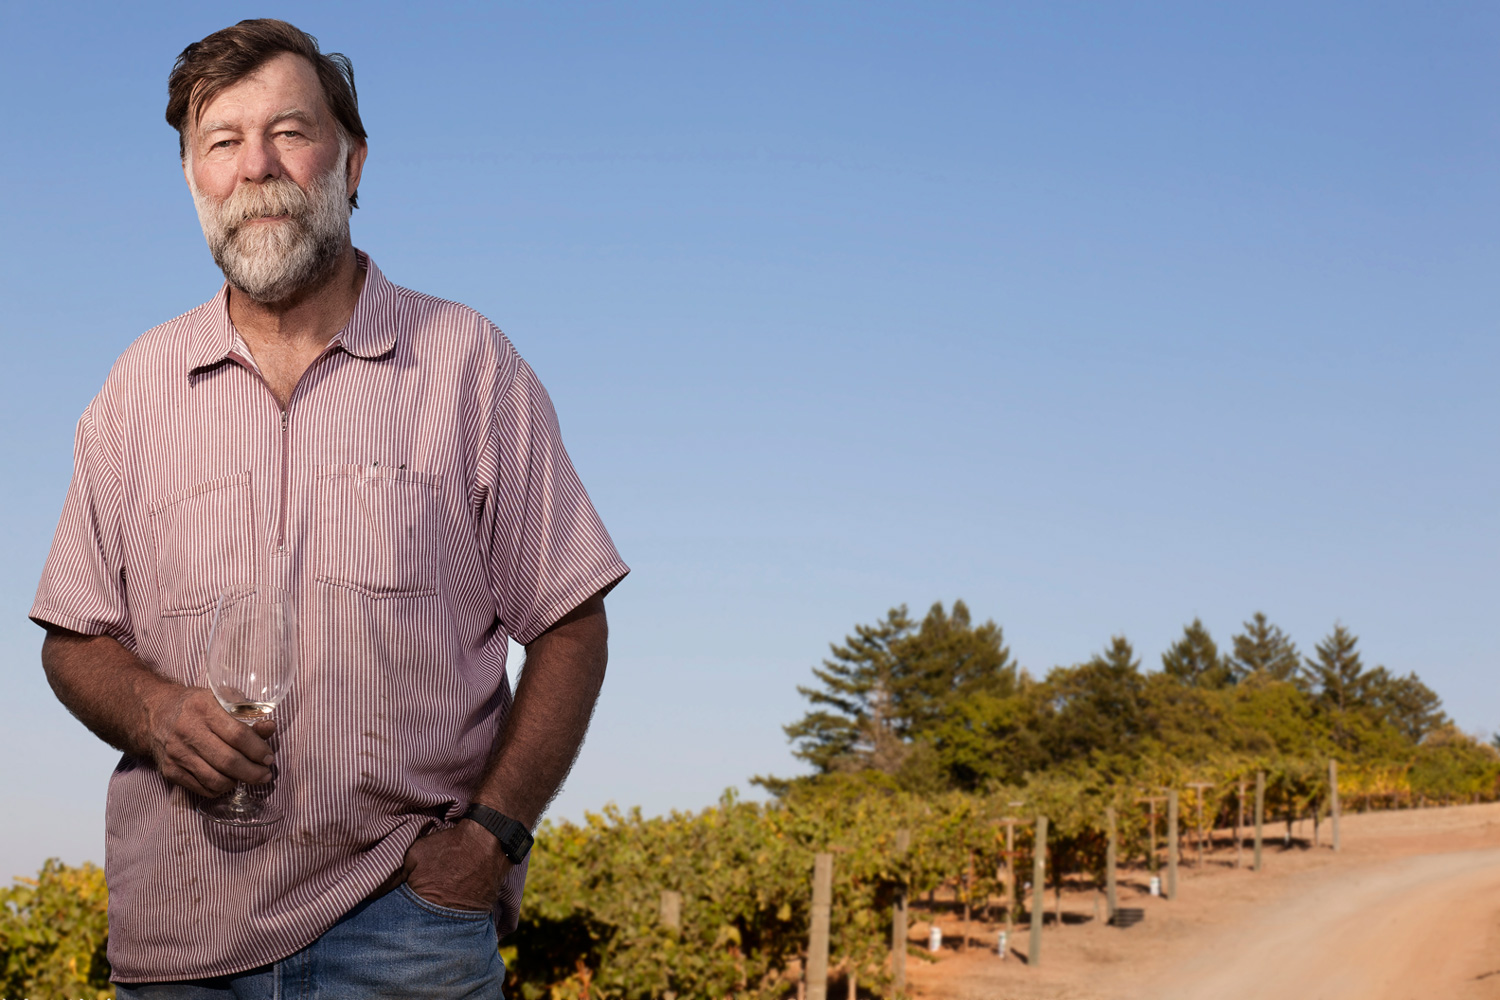 Business owner and winemaker Stuart Smith poses in front of a vineyard with a wine glass.